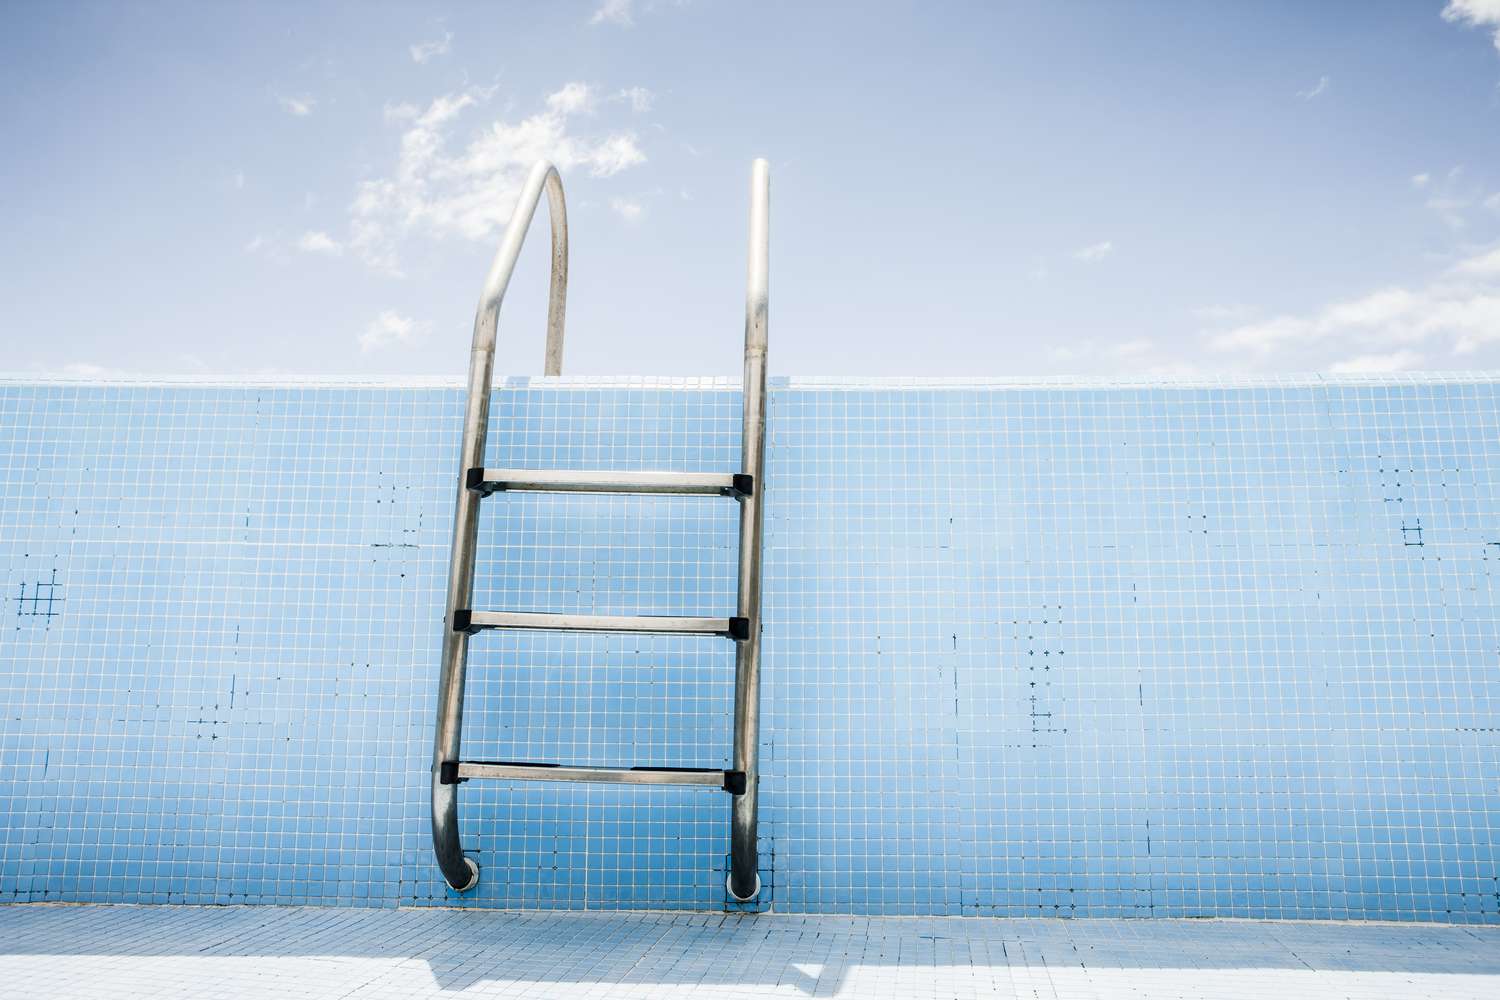 How to Clean Plastic Pool Ladder